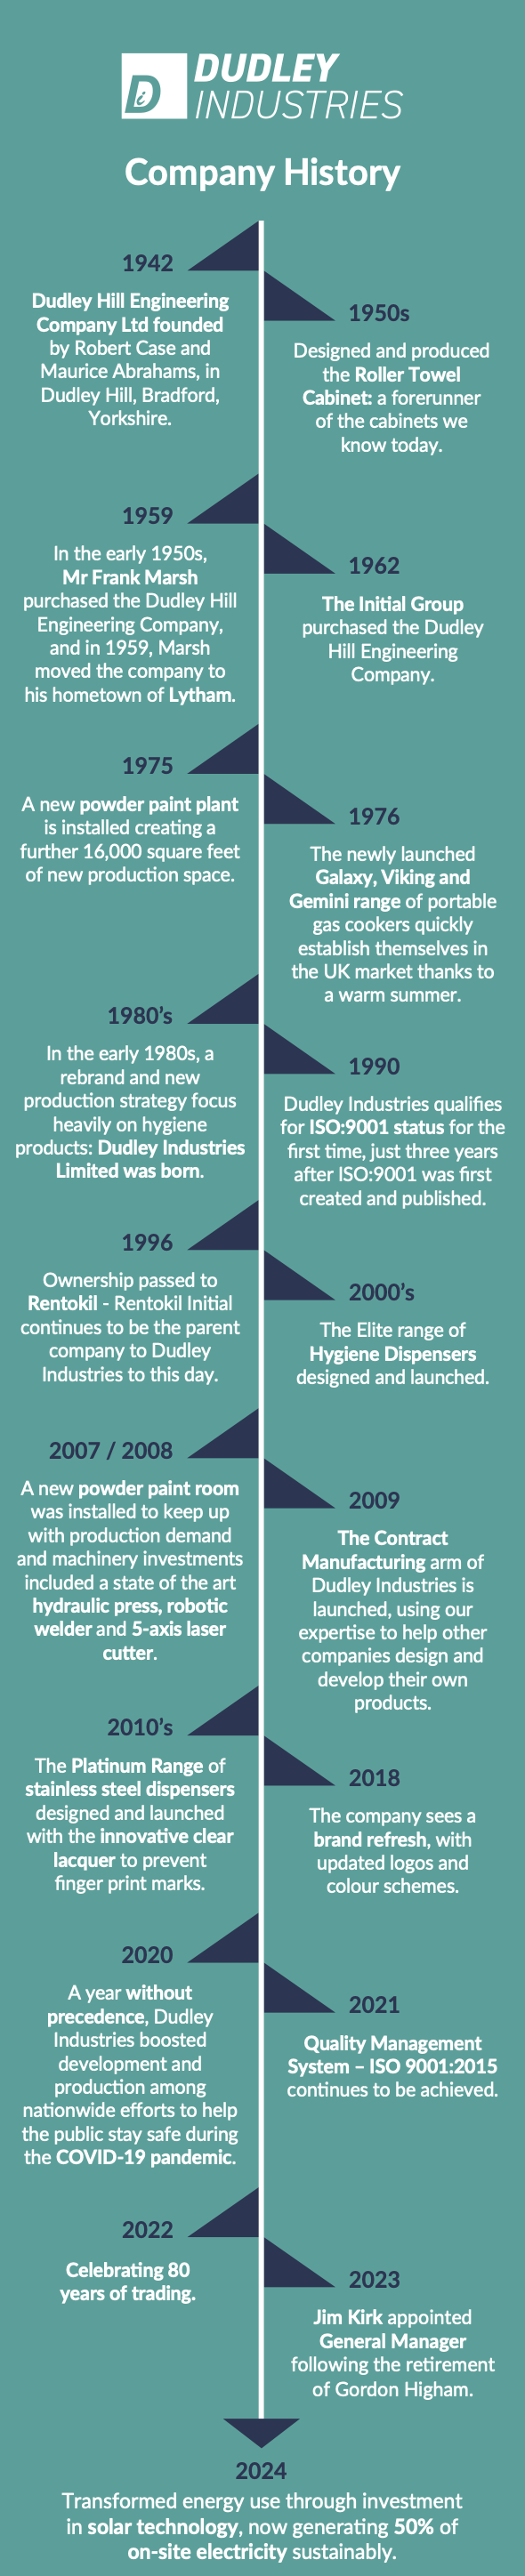 Dudley-Industries-Company-History-Timeline-2024